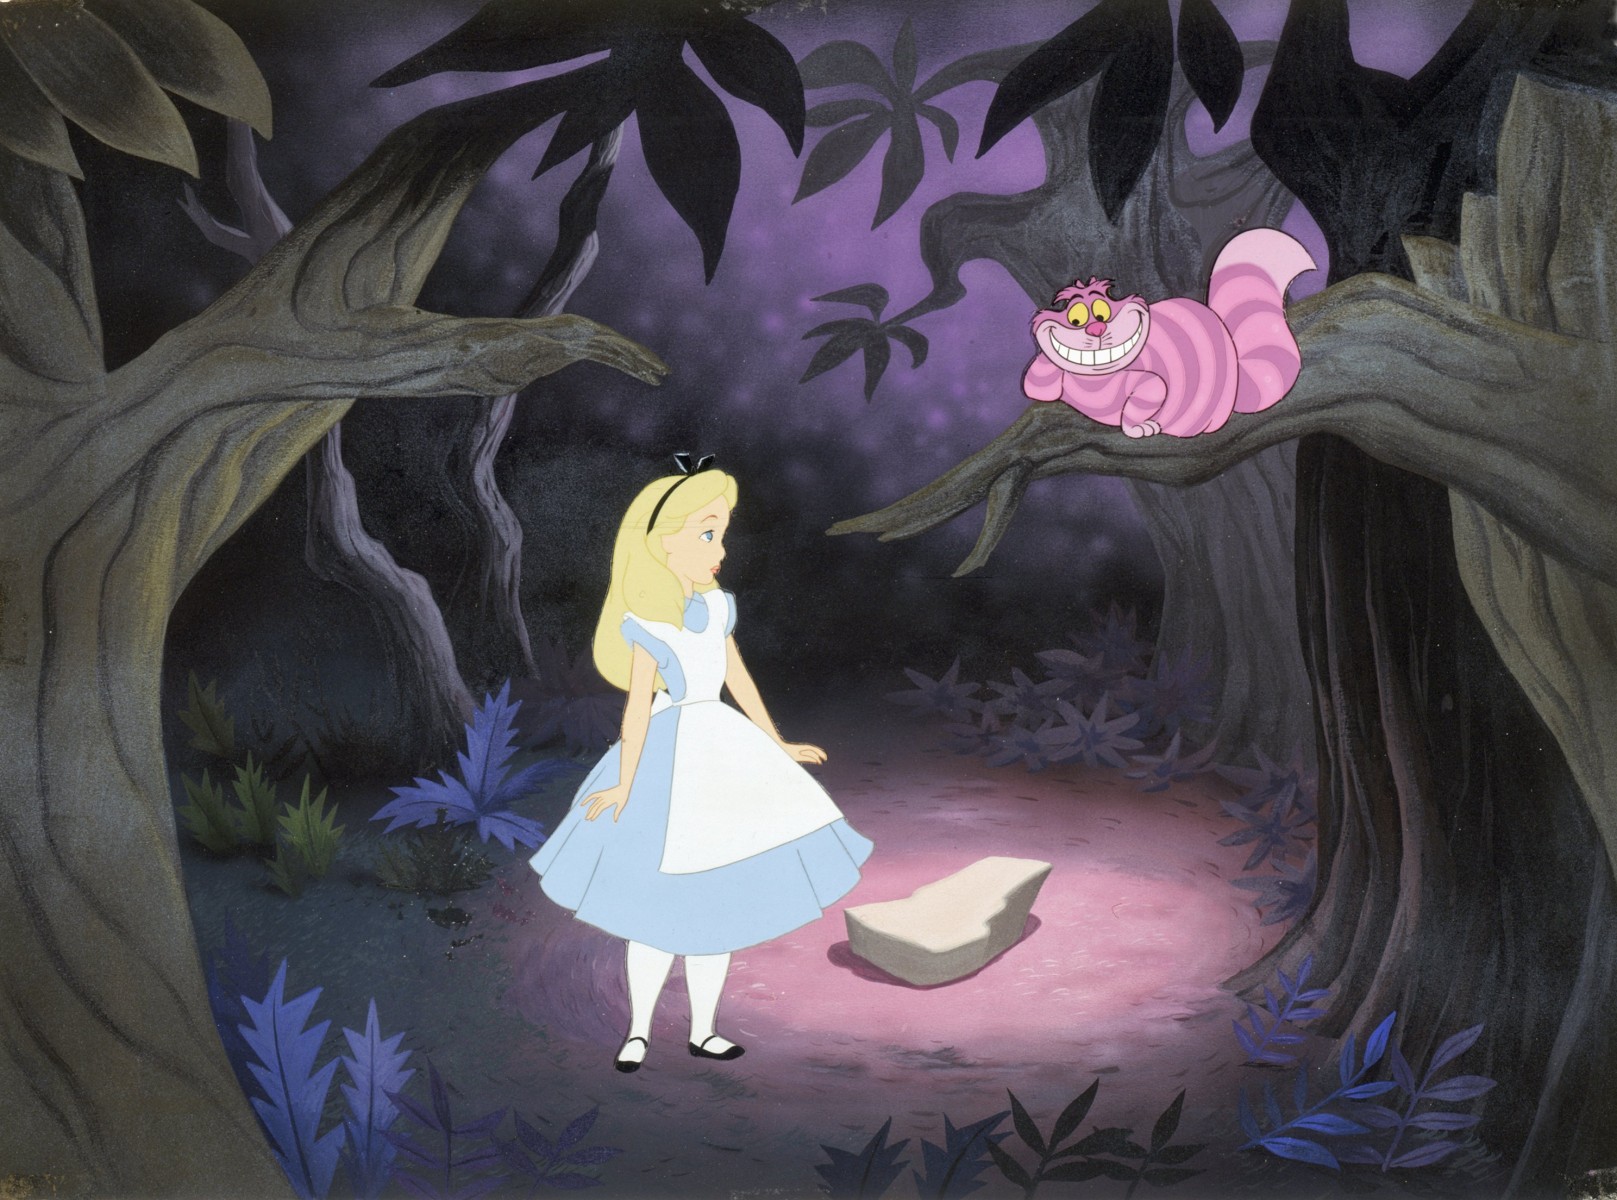 andre setianto recommends Pic Of Alice In Wonderland